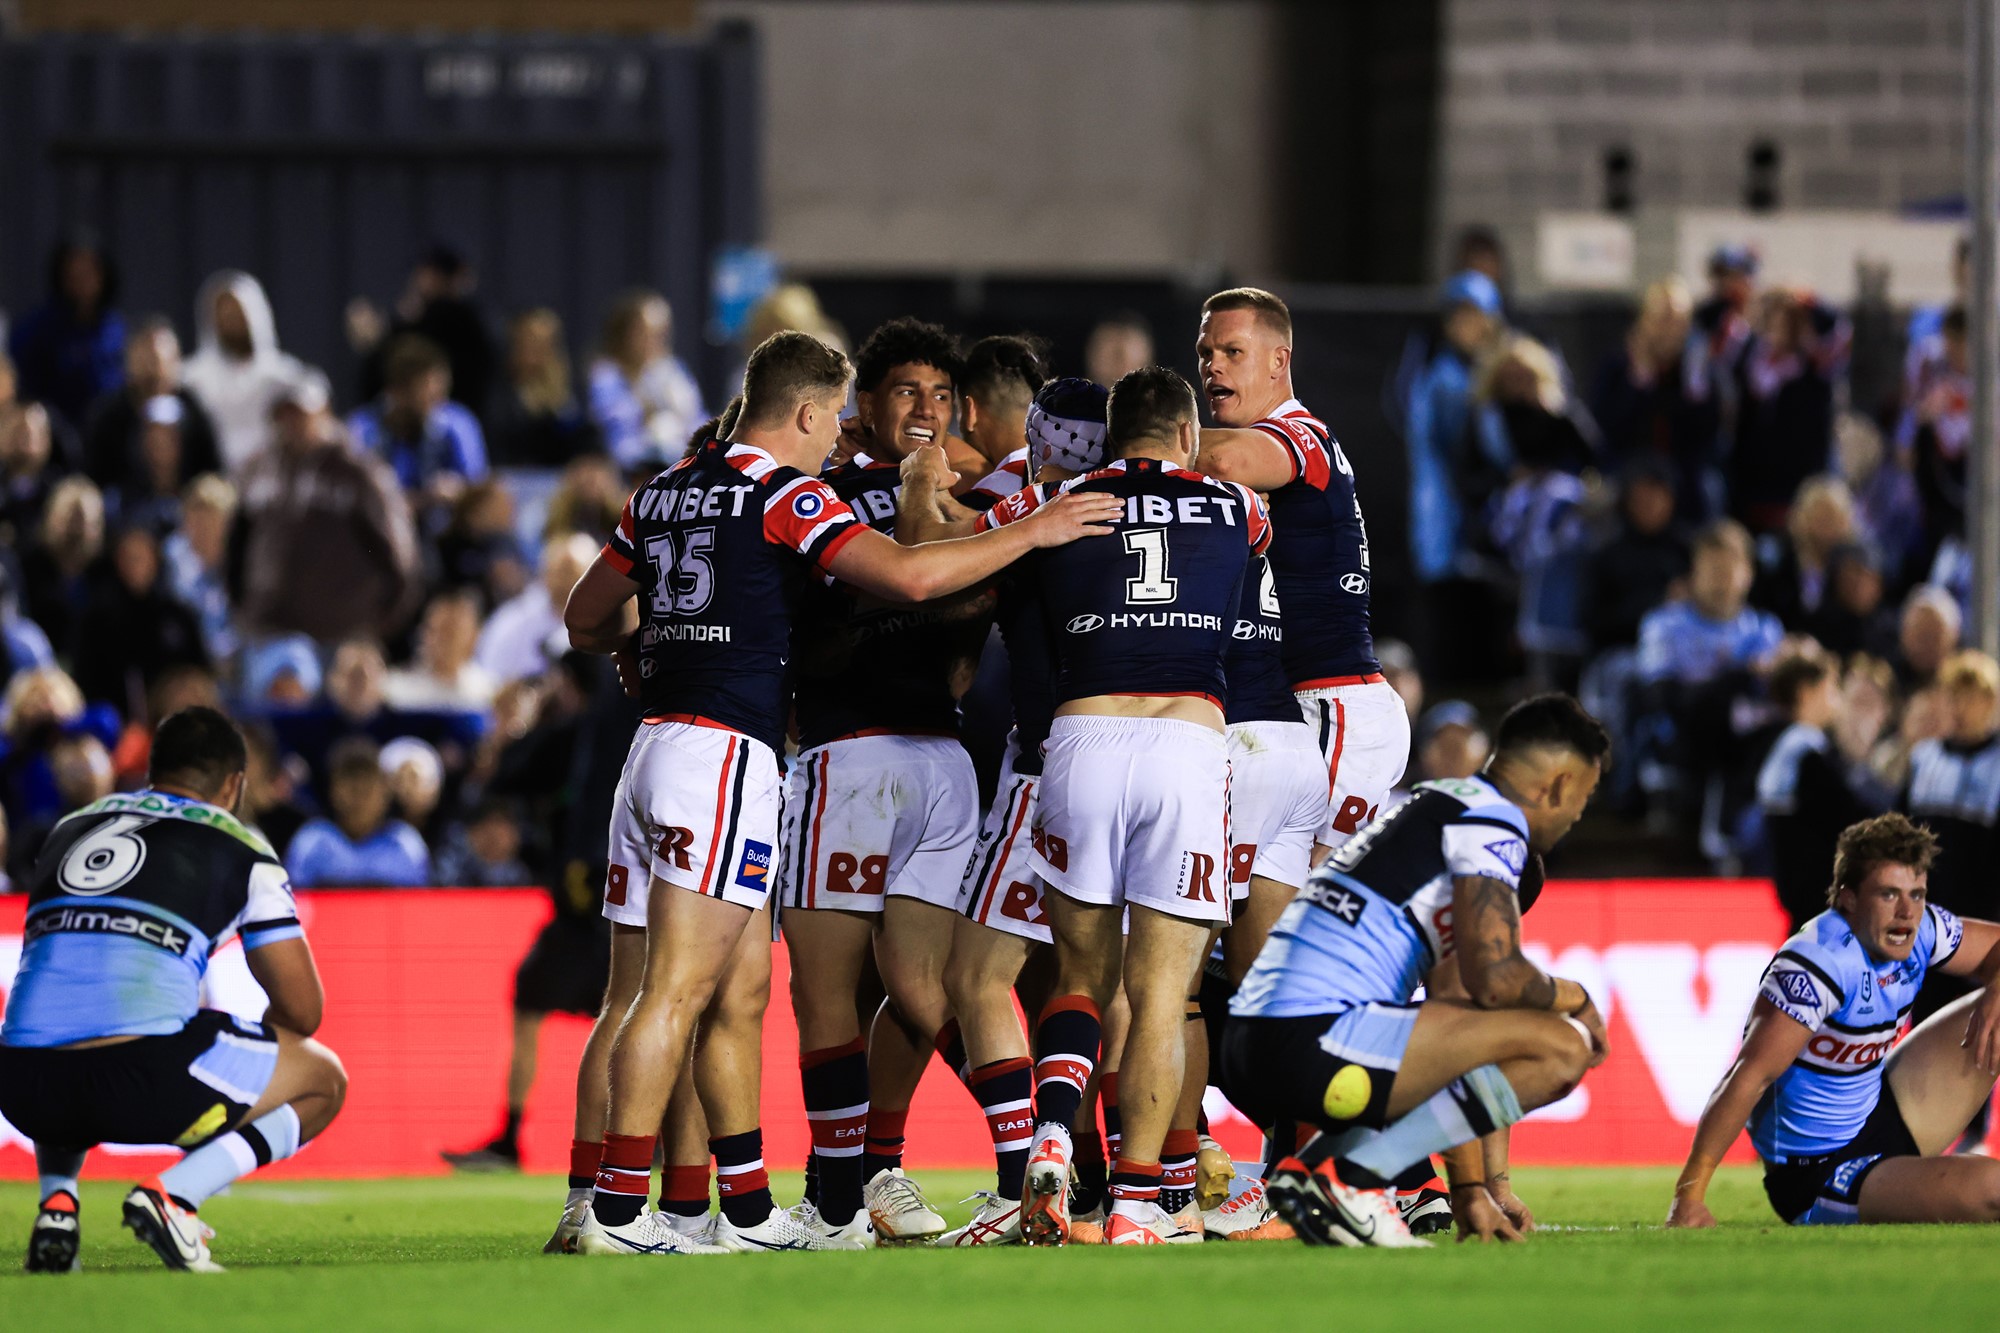 Roosters players hug as Sharks players slump to the grass.